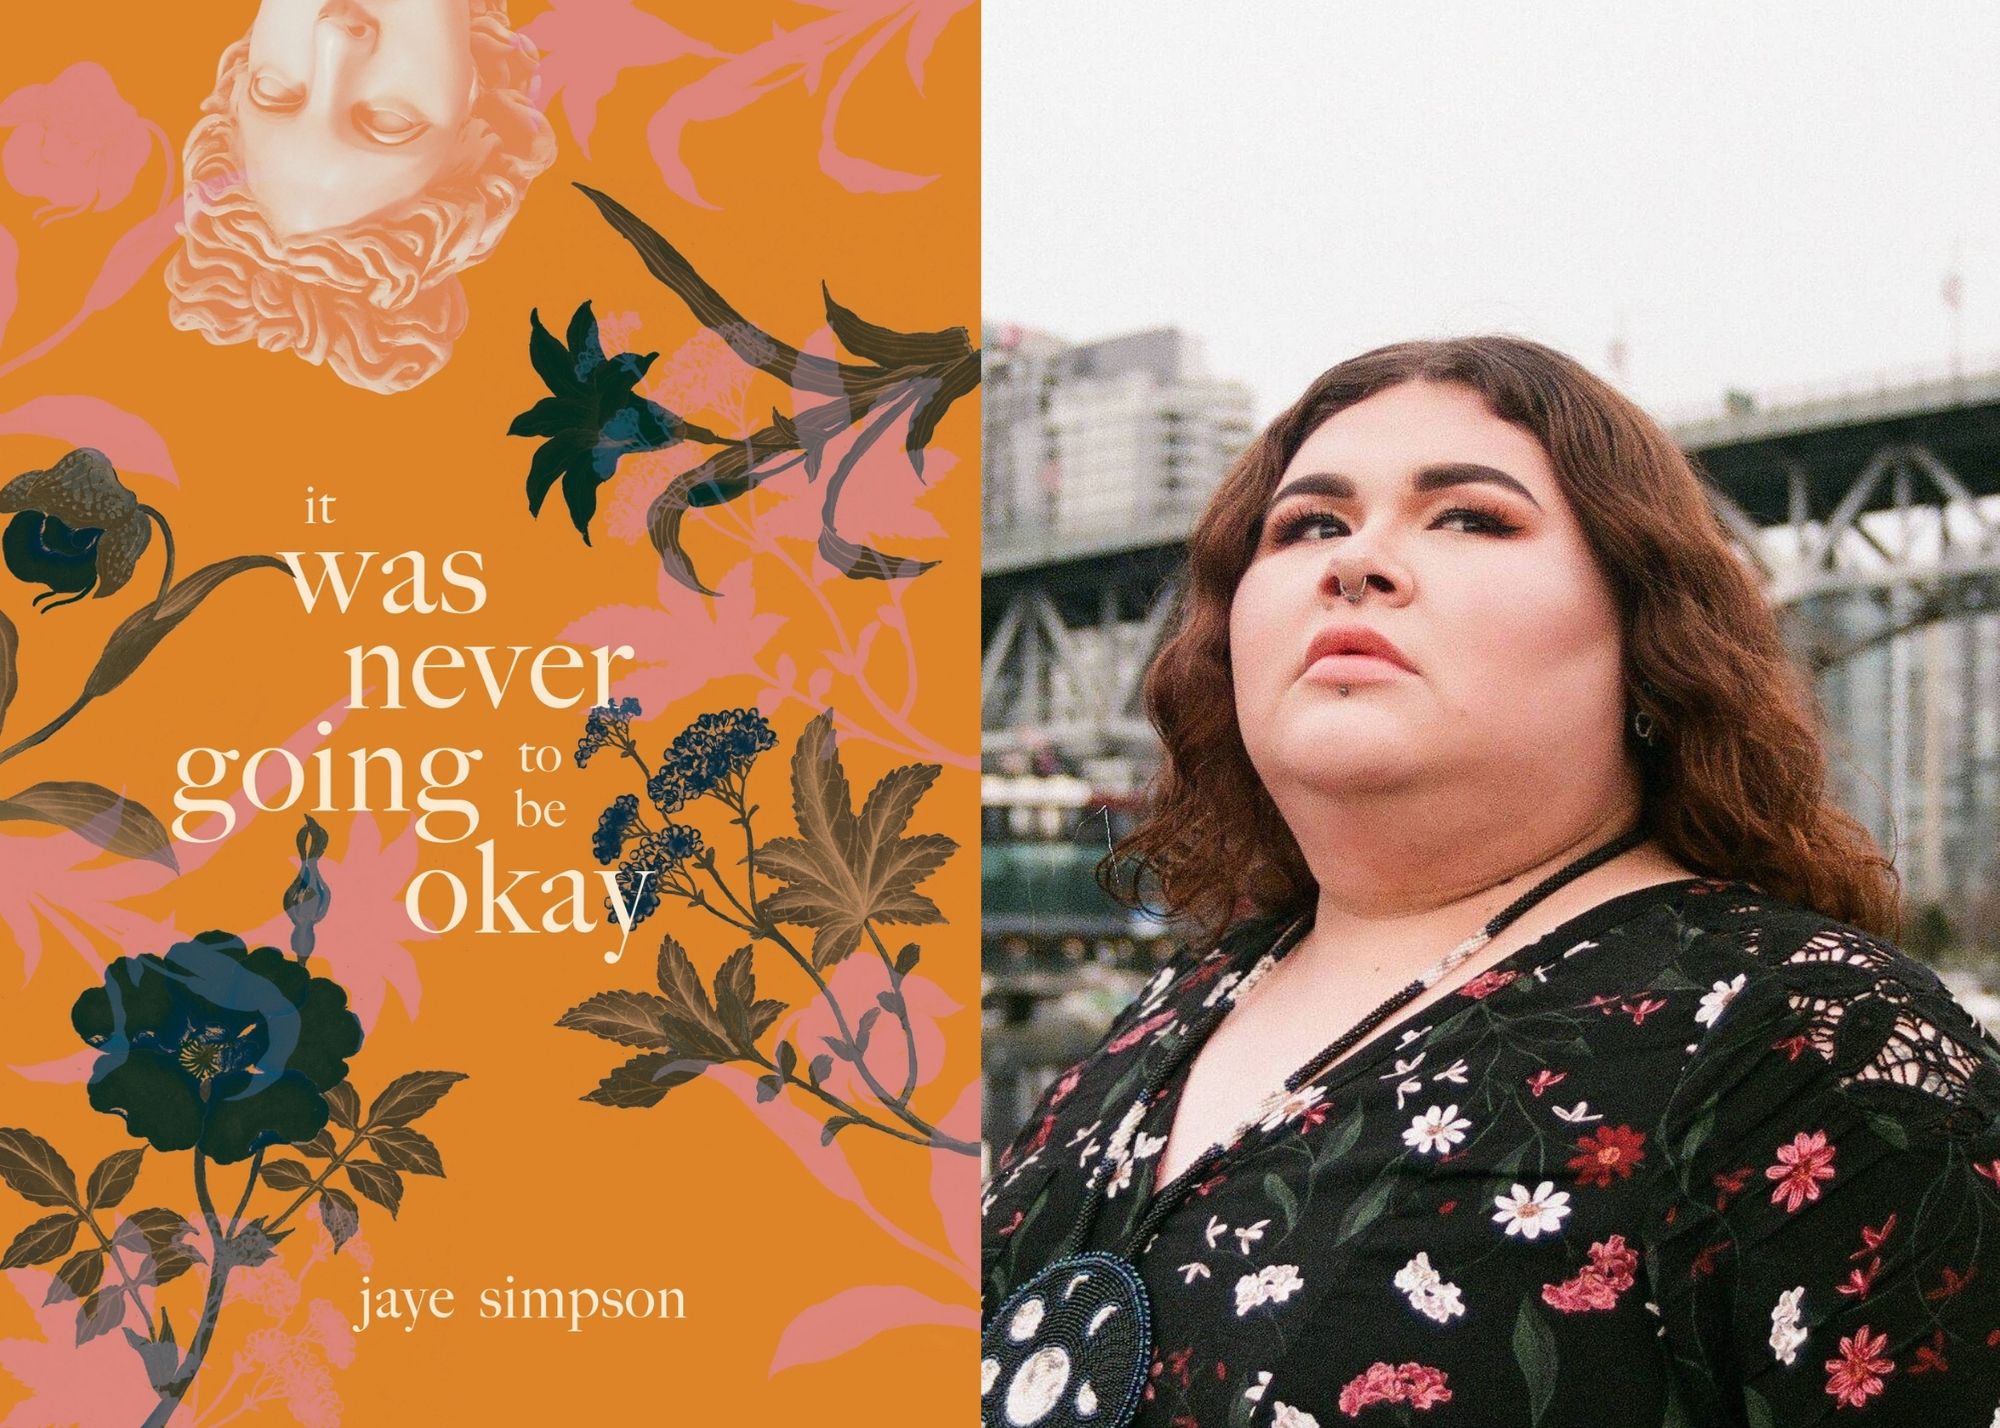 Poet jaye simpson on queering and reclaiming the world of poetry